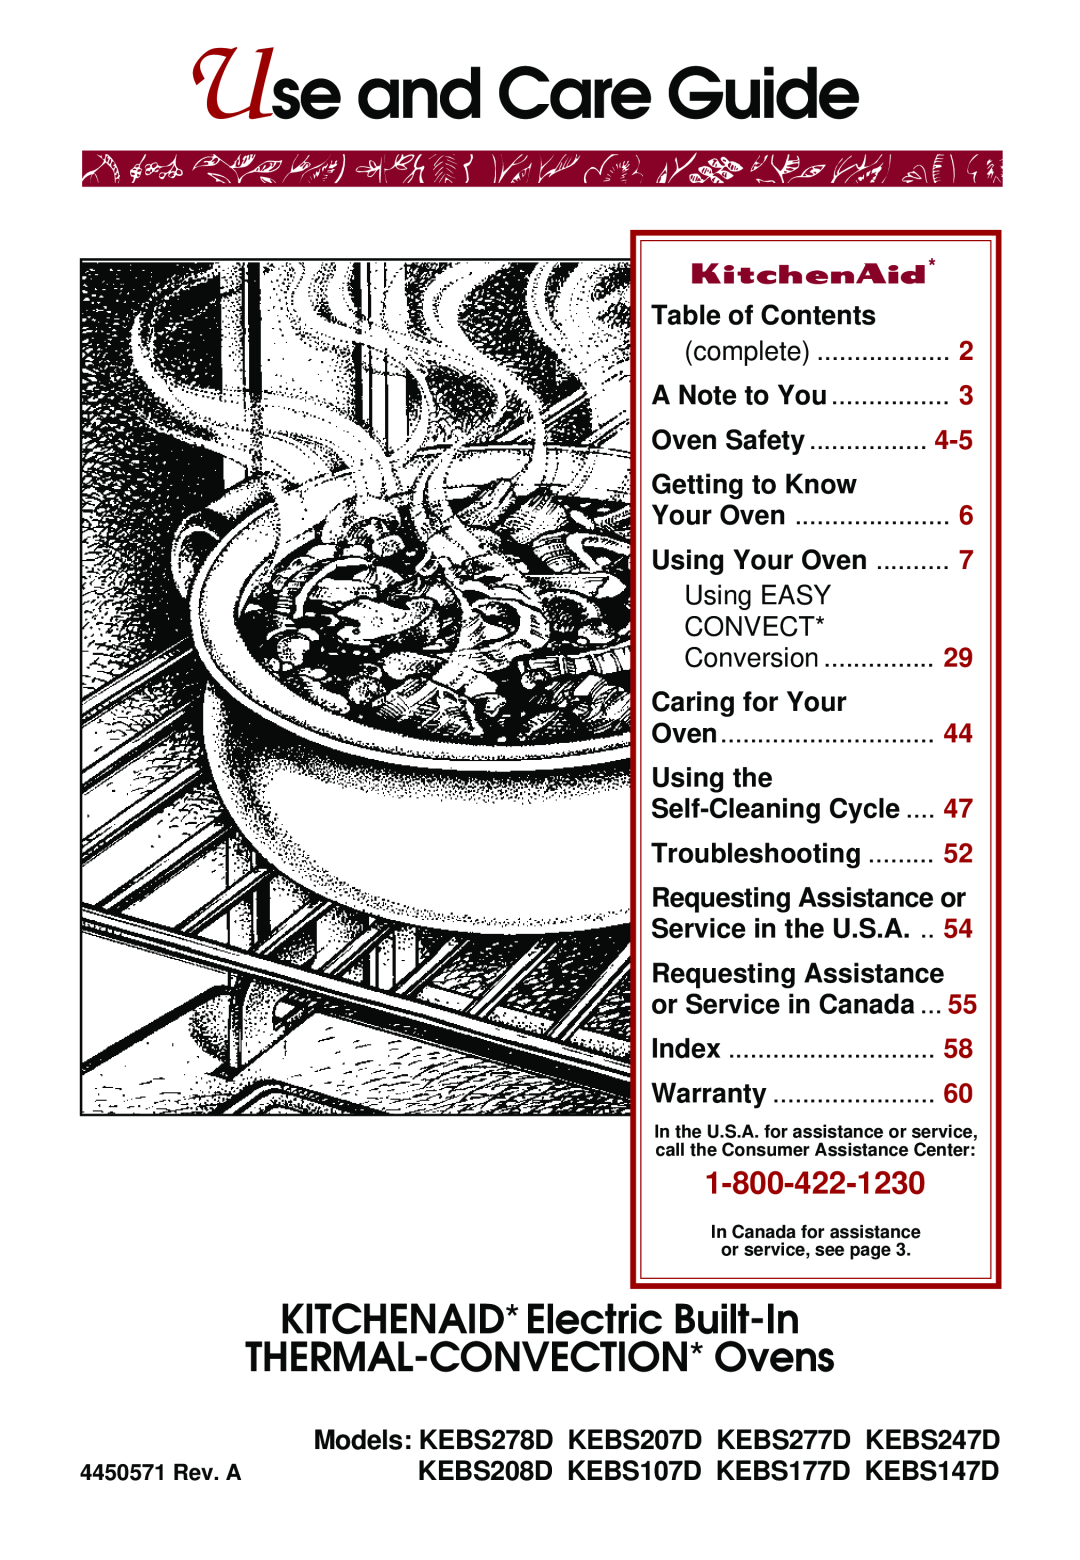 Whirlpool KEBS278D warranty Use and Care Guide, KITCHENAID* Electric Built-In THERMAL-CONVECTION* Ovens, Table of Contents 